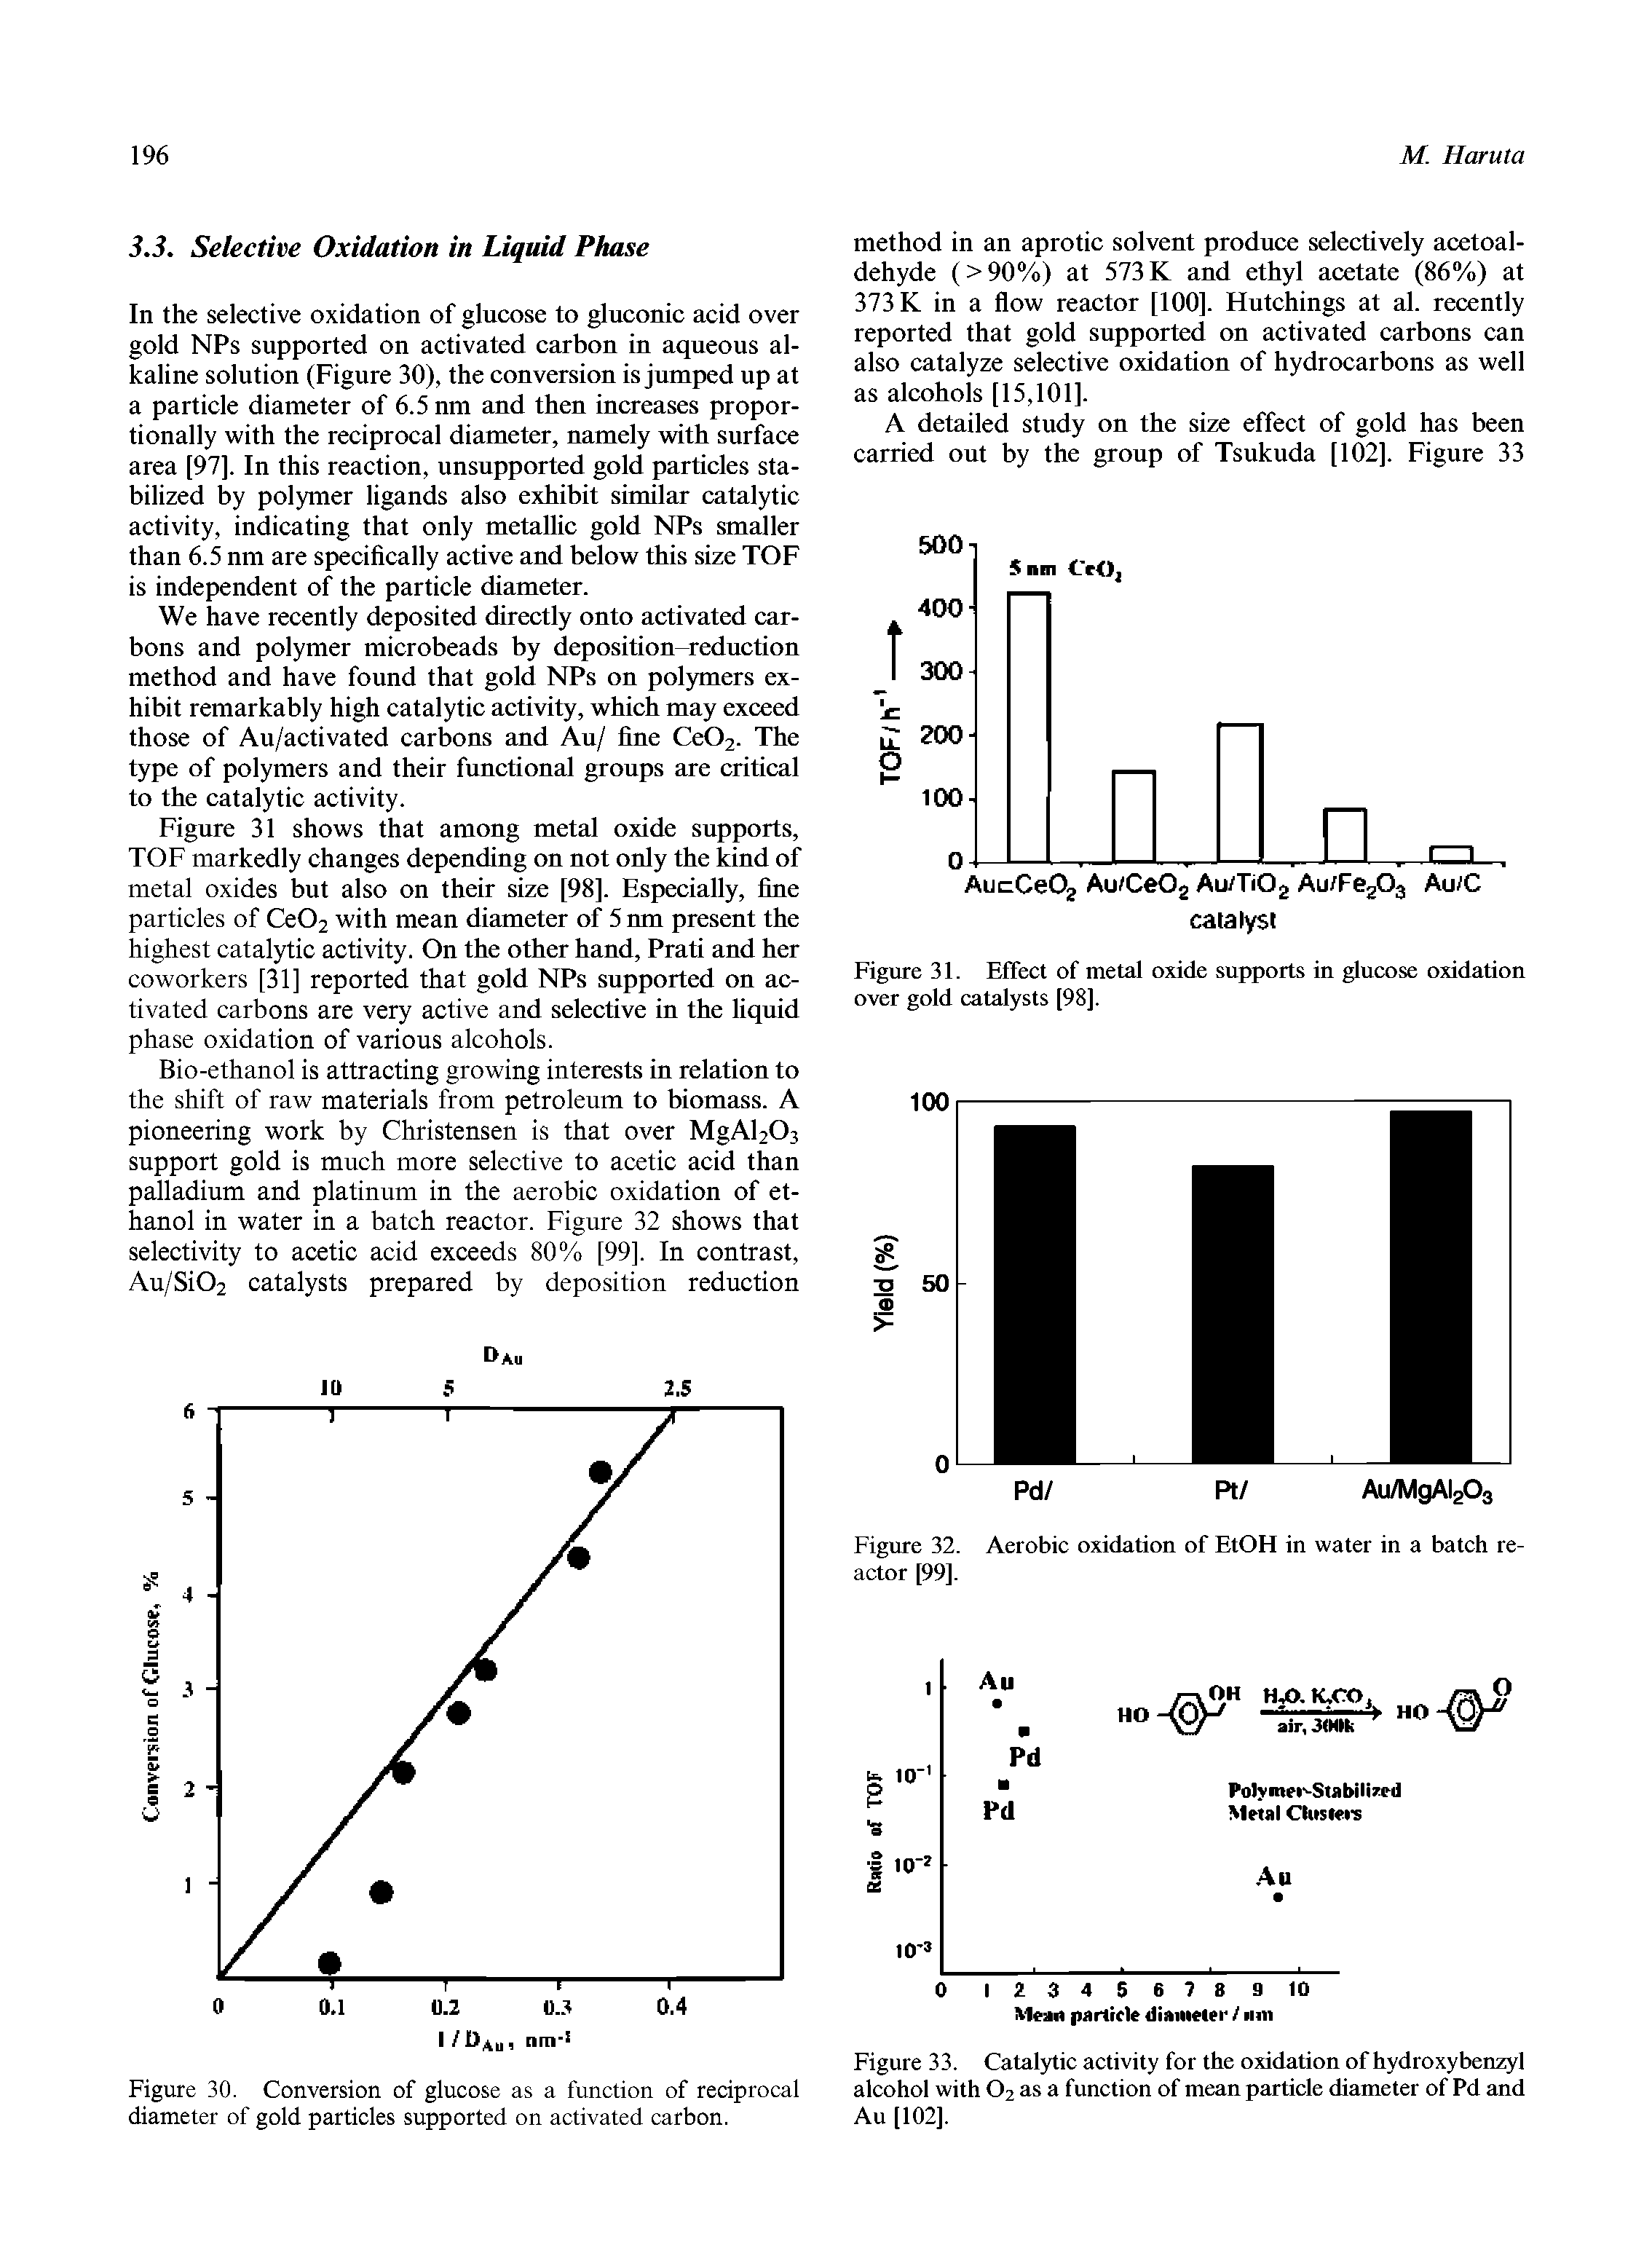 Figure 30. Conversion of glucose as a function of reciprocal diameter of gold particles supported on activated carbon.